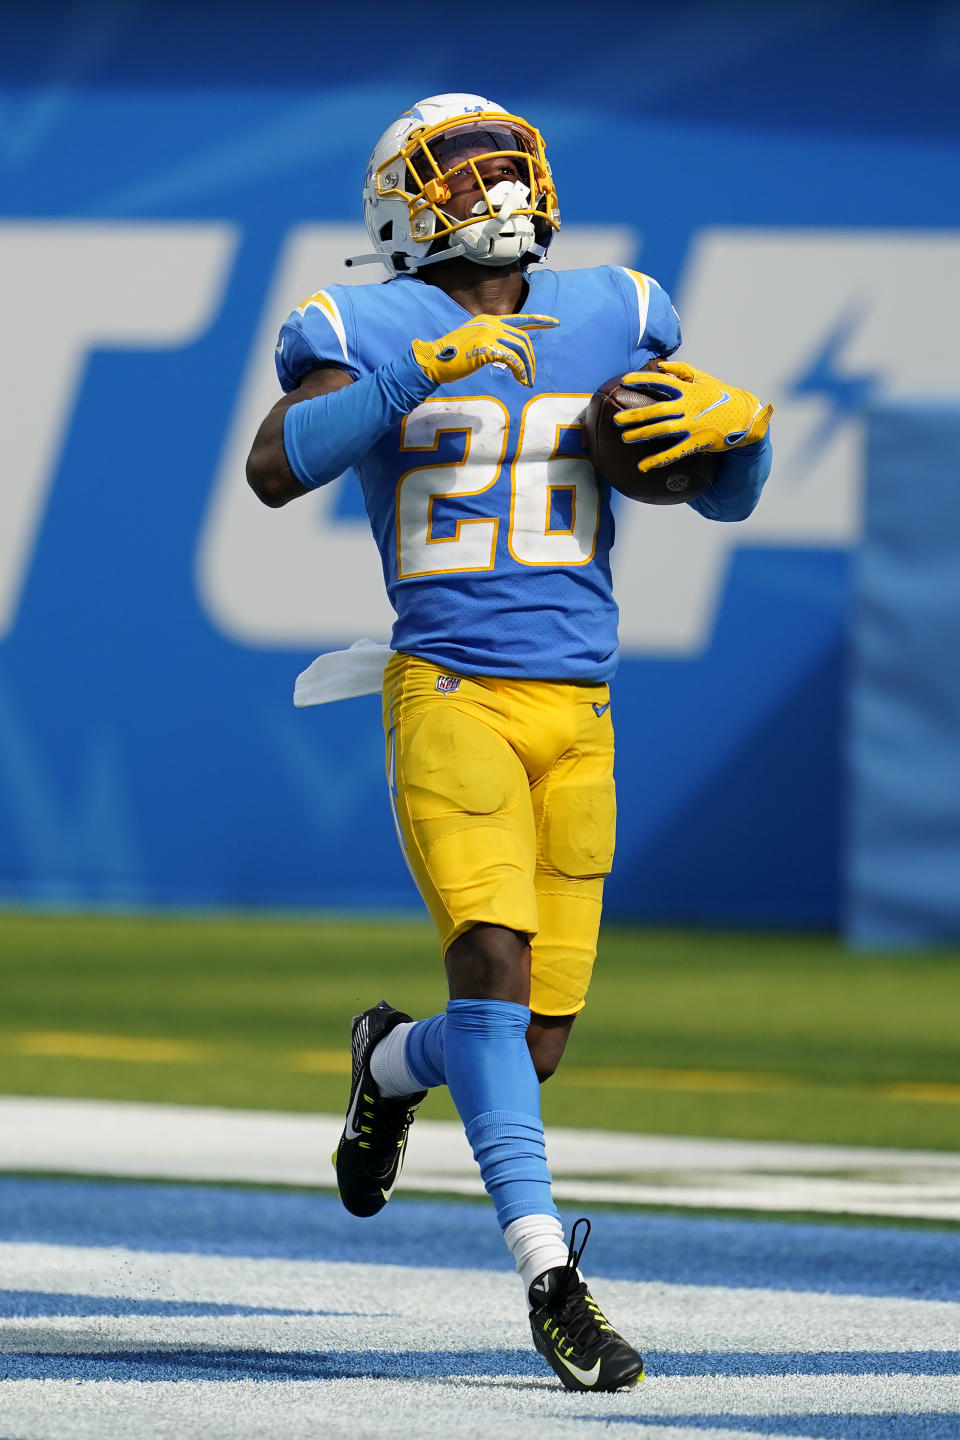 Los Angeles Chargers cornerback Asante Samuel Jr. (26) reacts after intercepting a pass against the Las Vegas Raiders during the second half of an NFL football game in Inglewood, Calif., Sunday, Sept. 11, 2022. (AP Photo/Marcio Jose Sanchez)